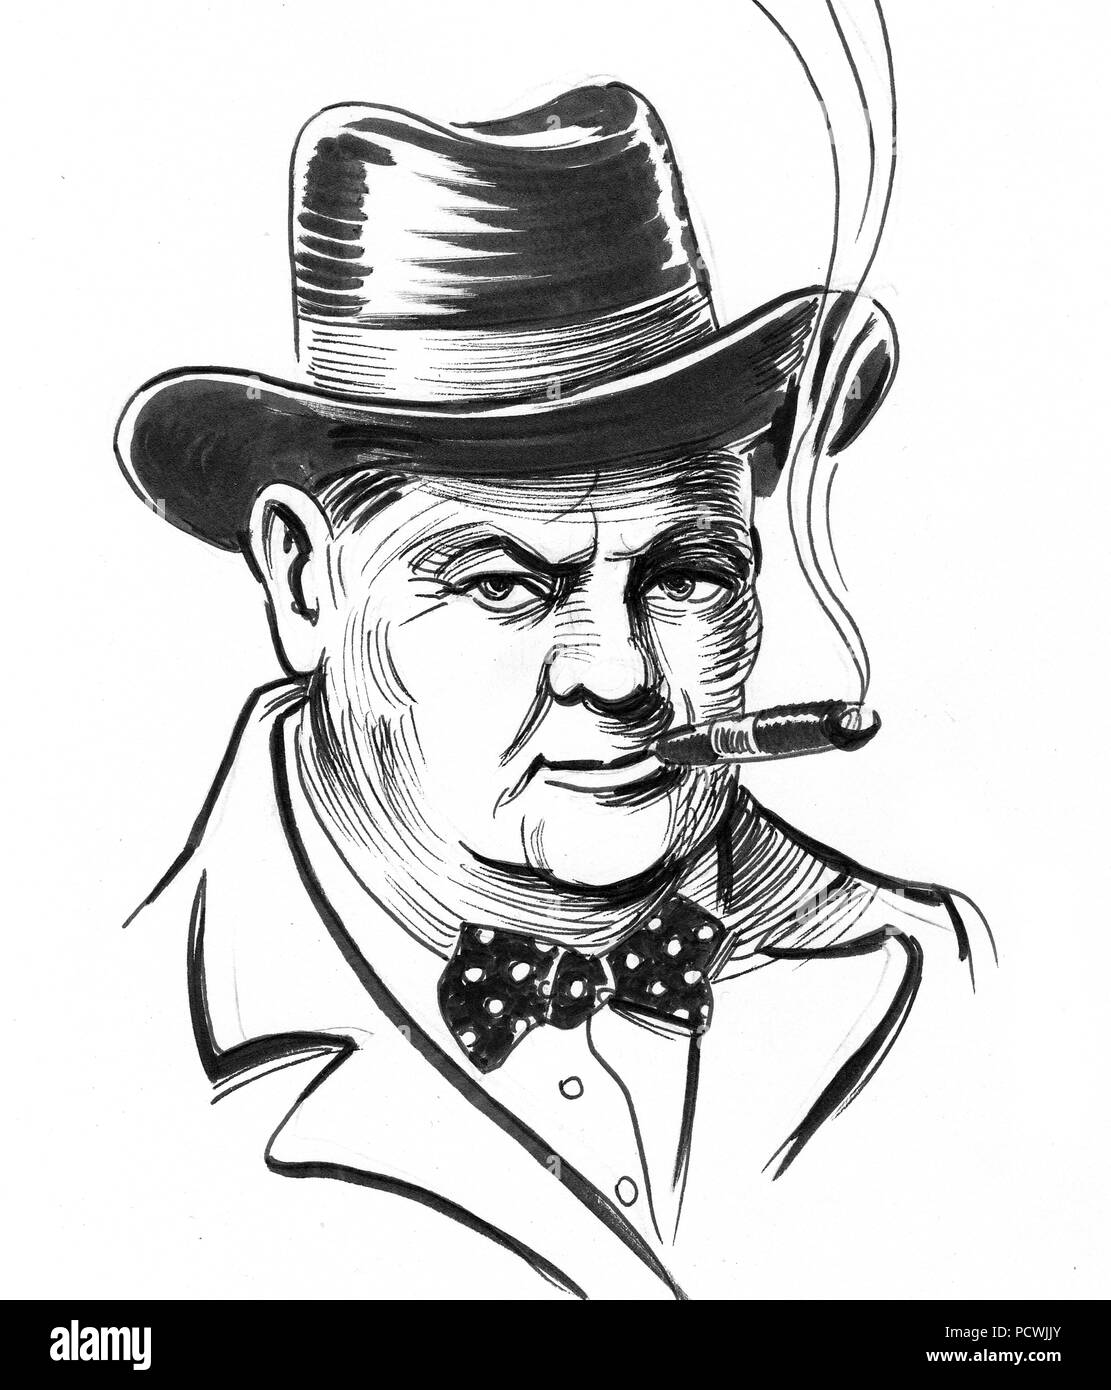 How To Draw Winston Churchill Winston Churchill Step by Step Drawing  Guide by Dawn  DragoArt